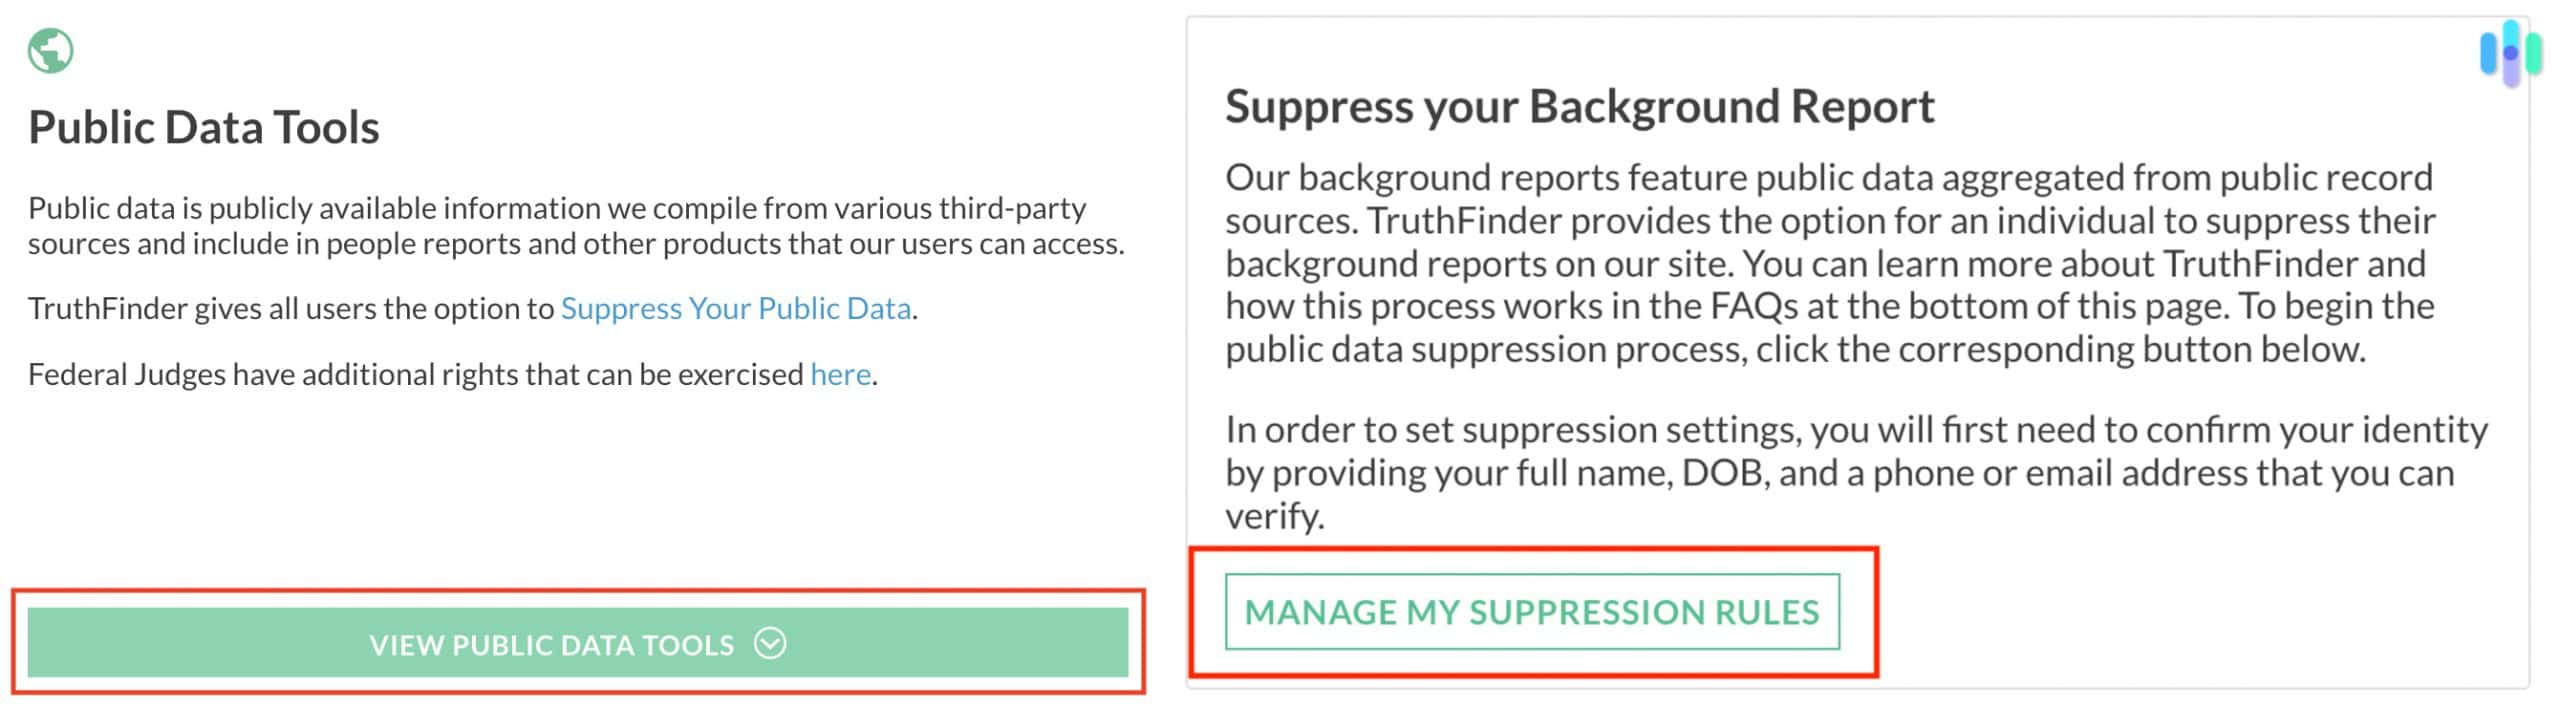 Truthfinder public data tools and suppress backgrond report options